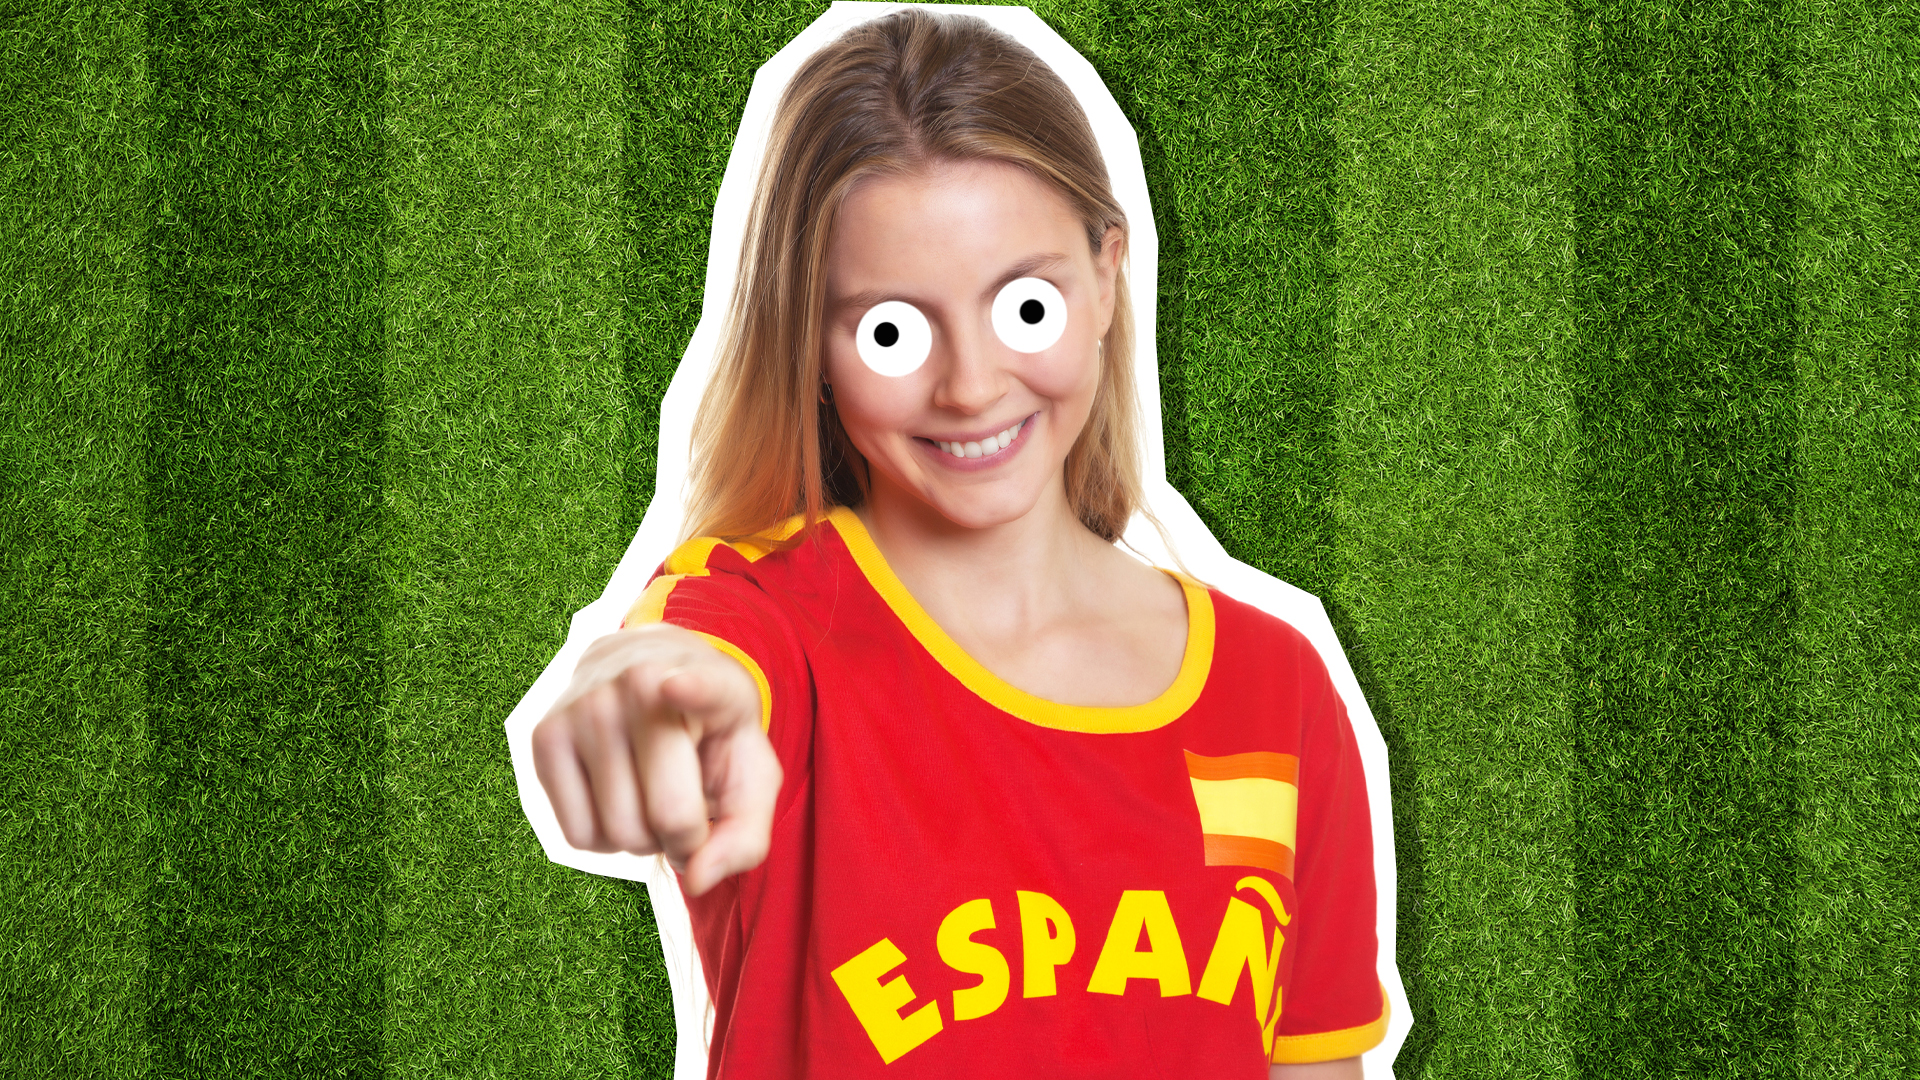 A Spanish football supporter 